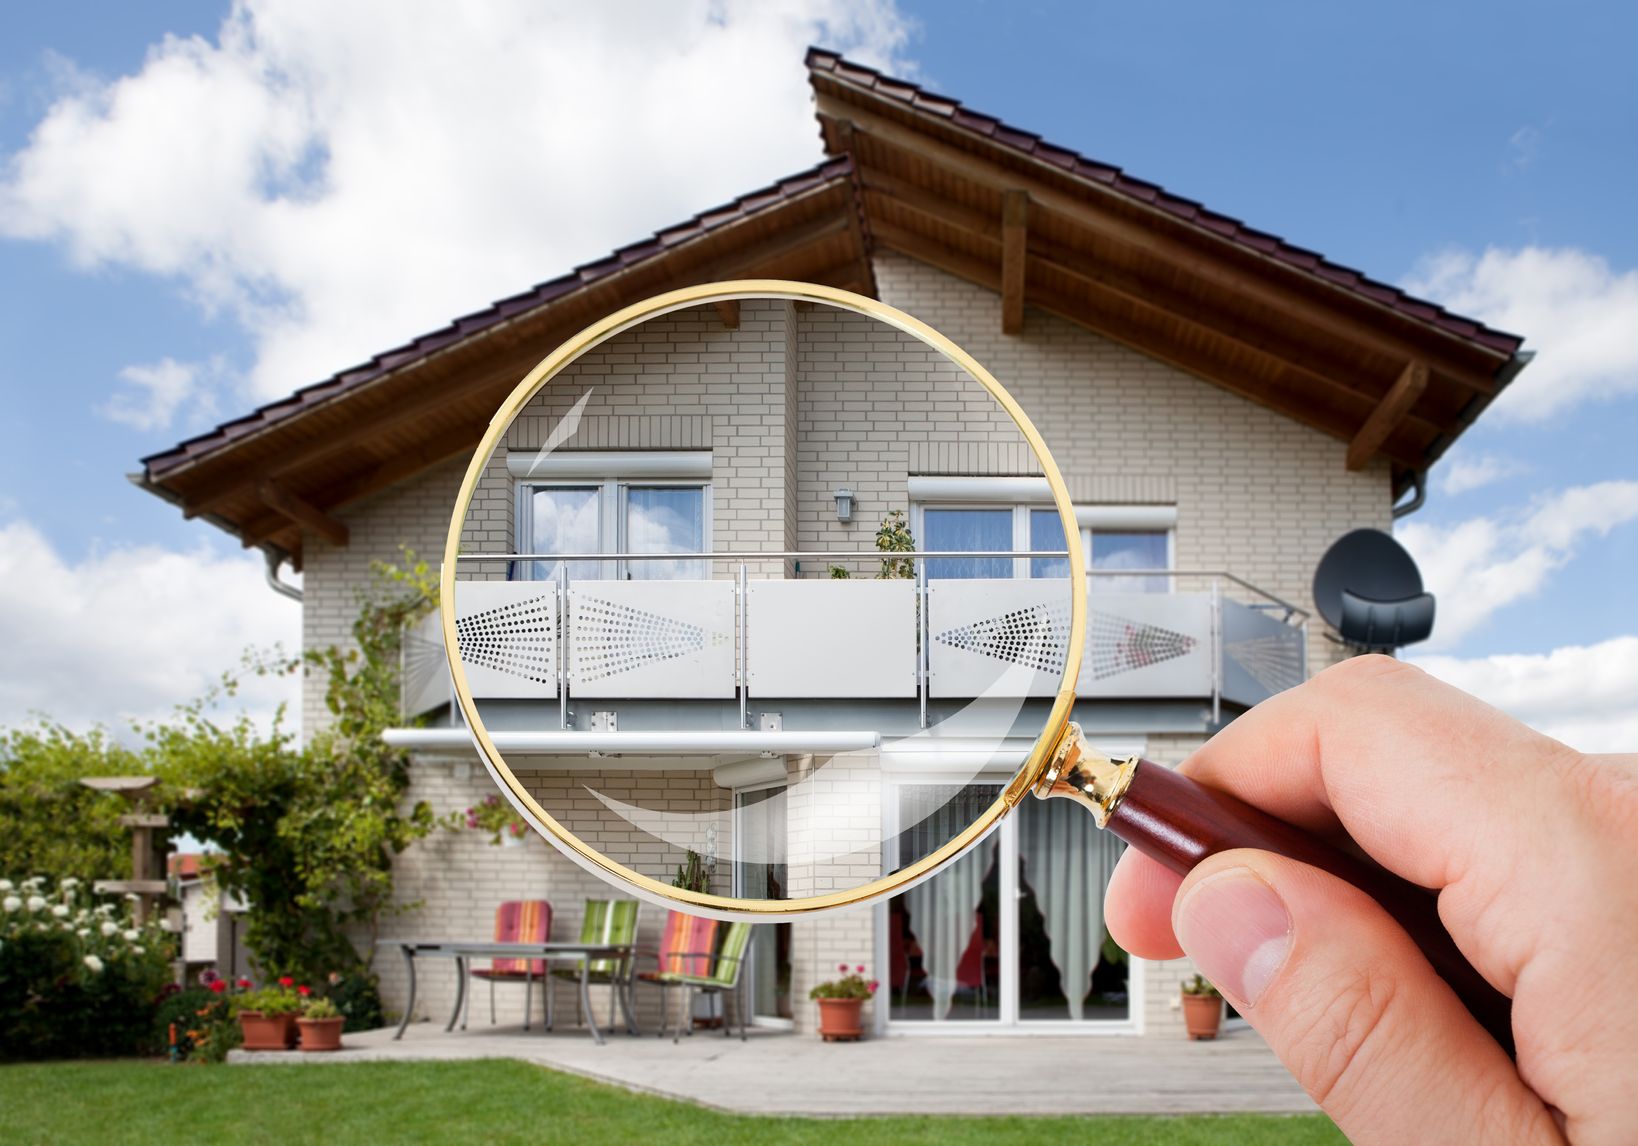 39653963 - person hand with magnifying glass over luxury house